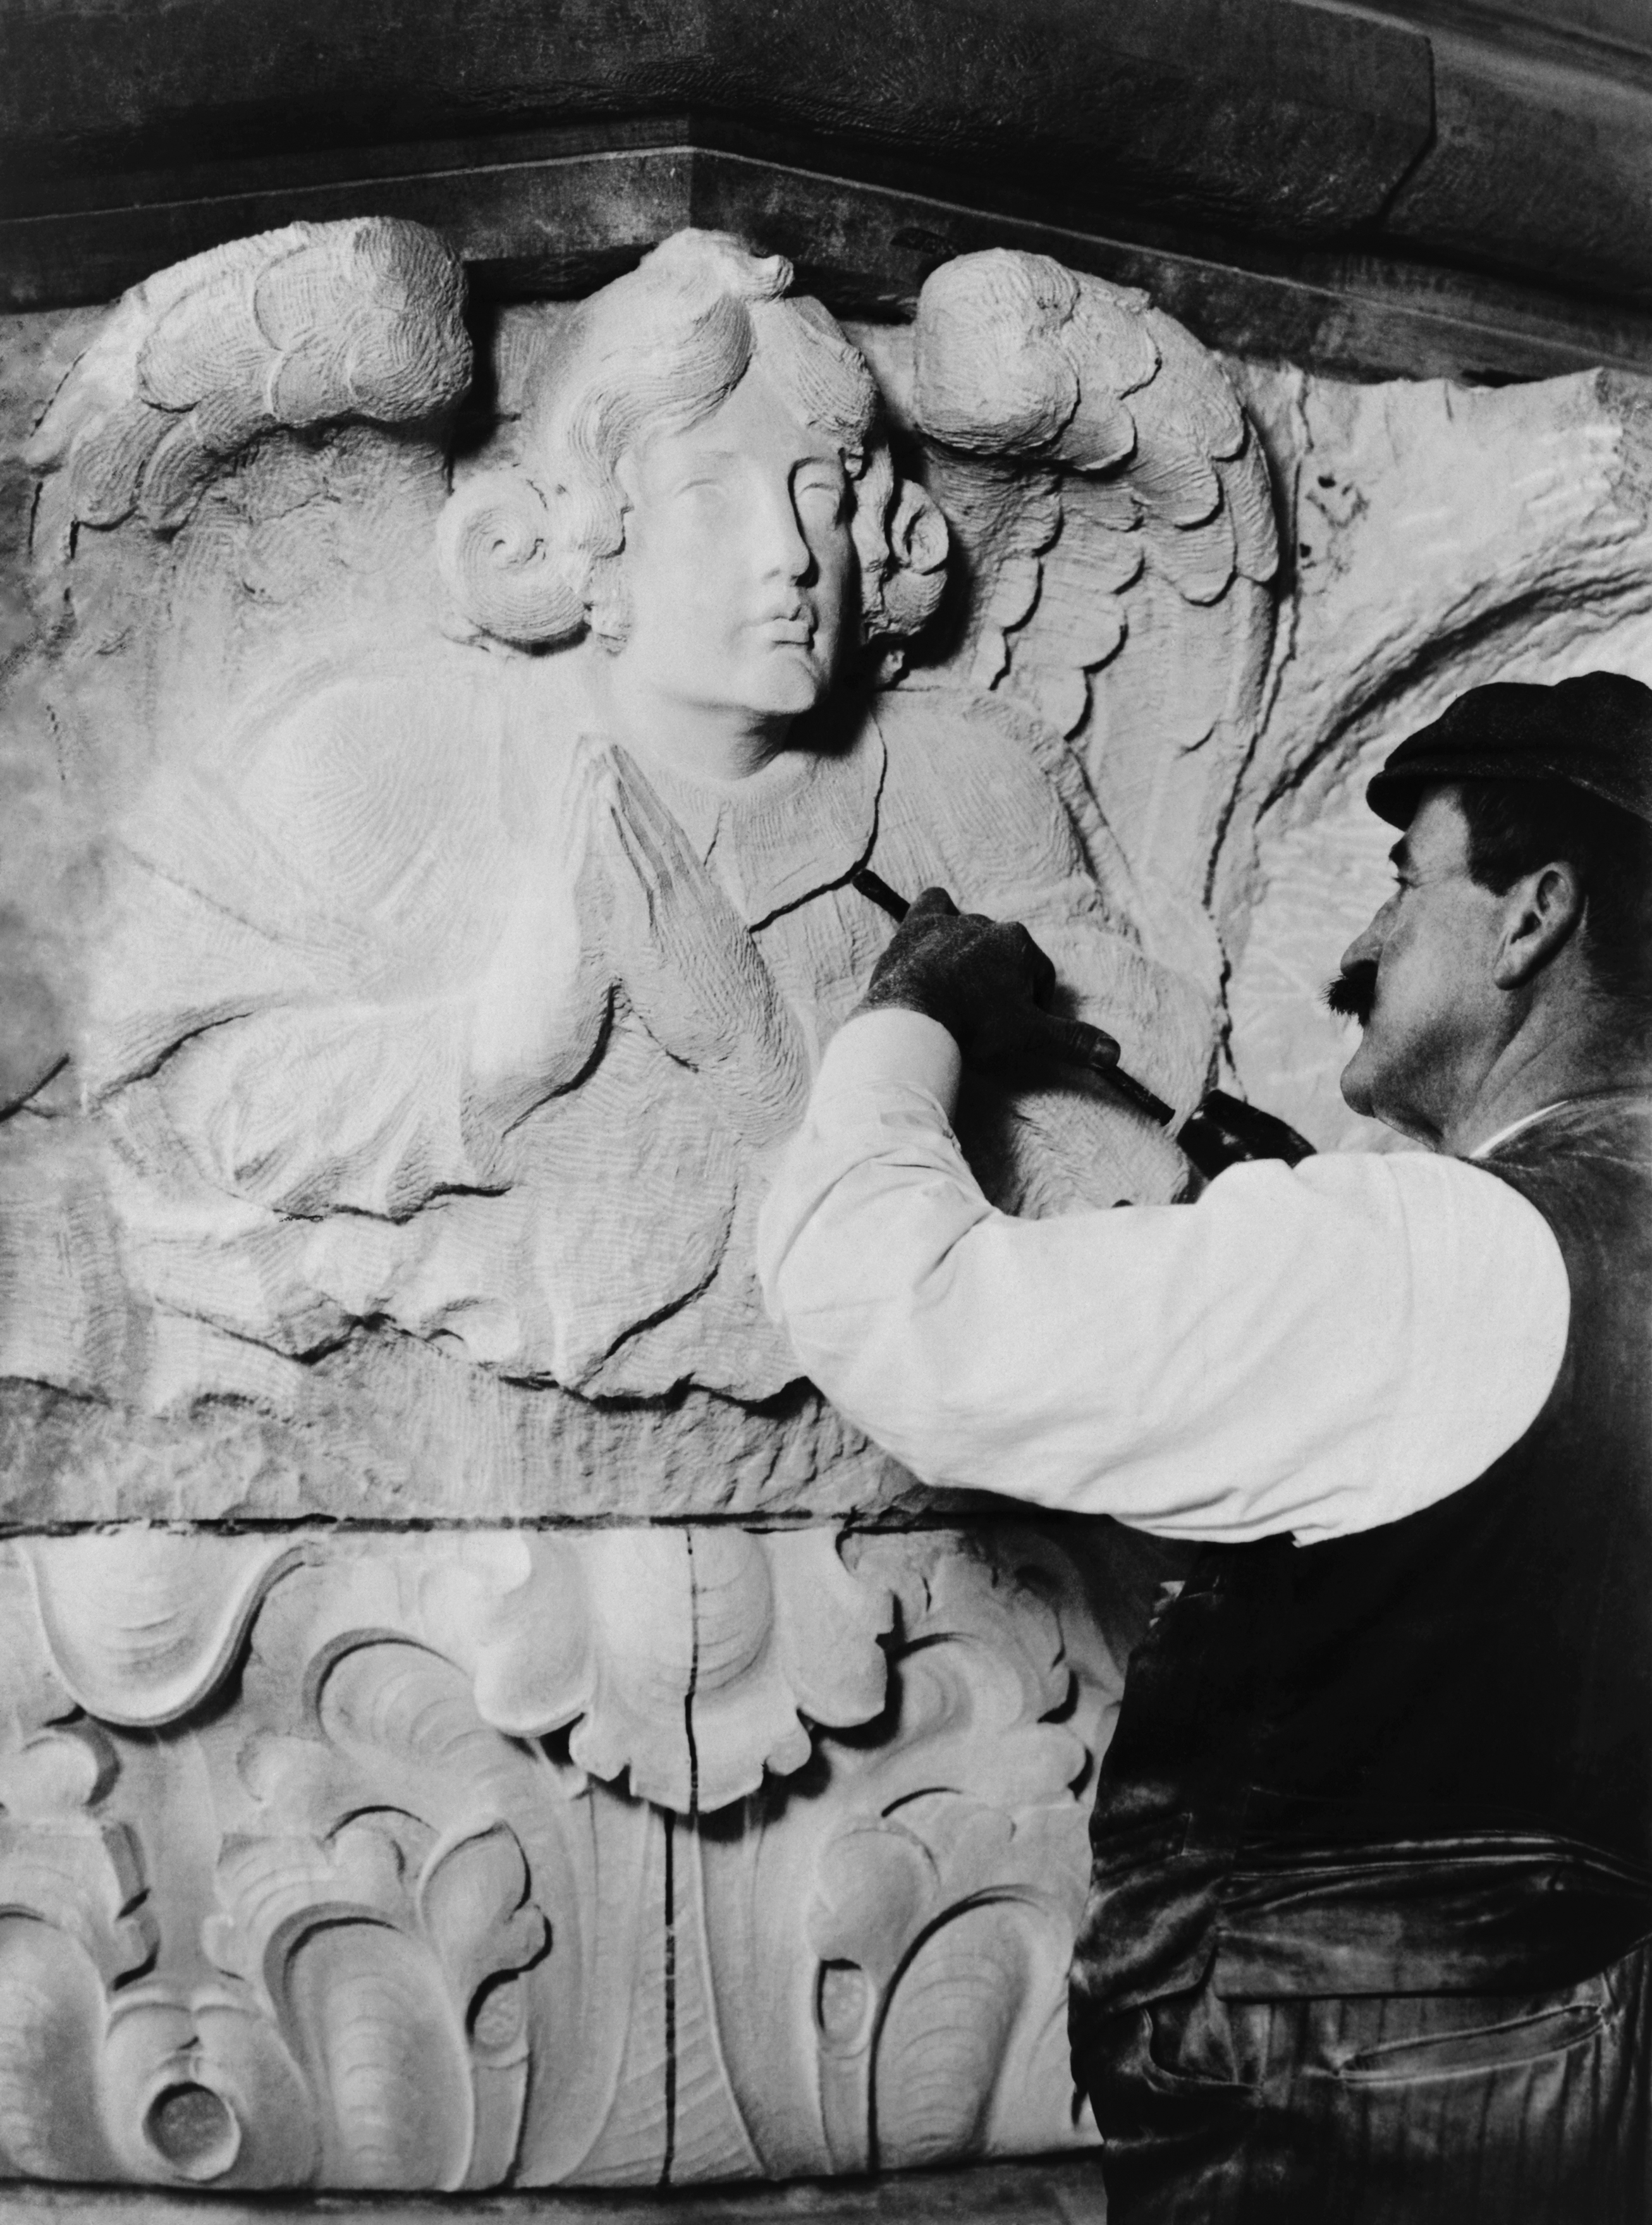 Stone carving - Wikipedia